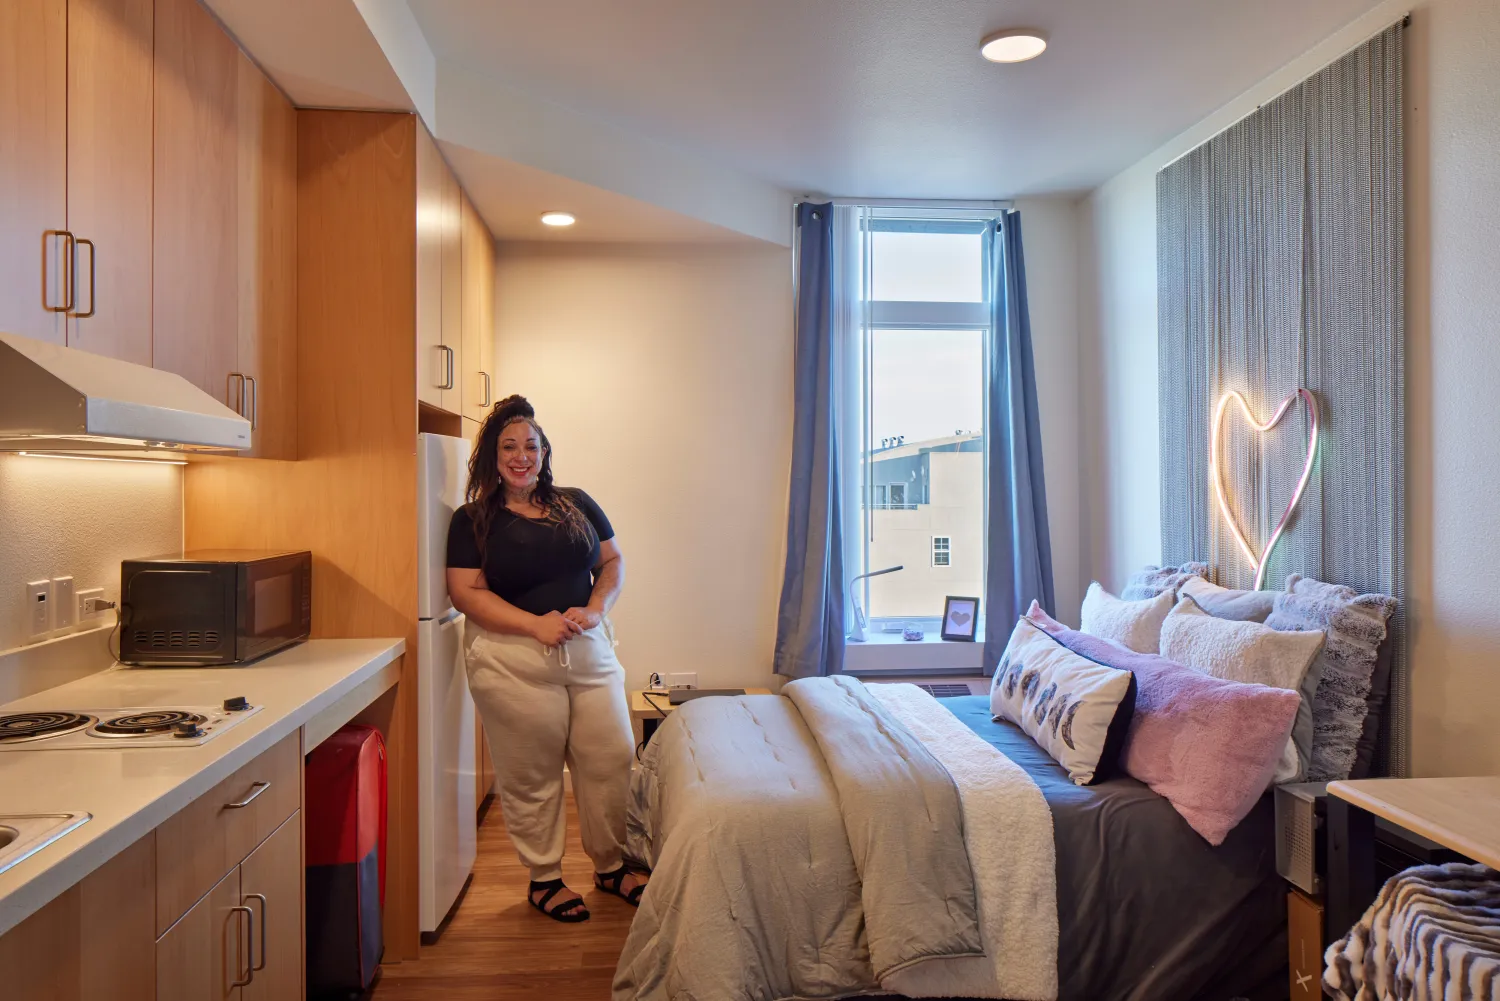 Interior of studio unit with resident showing kitchen and bed set-up.